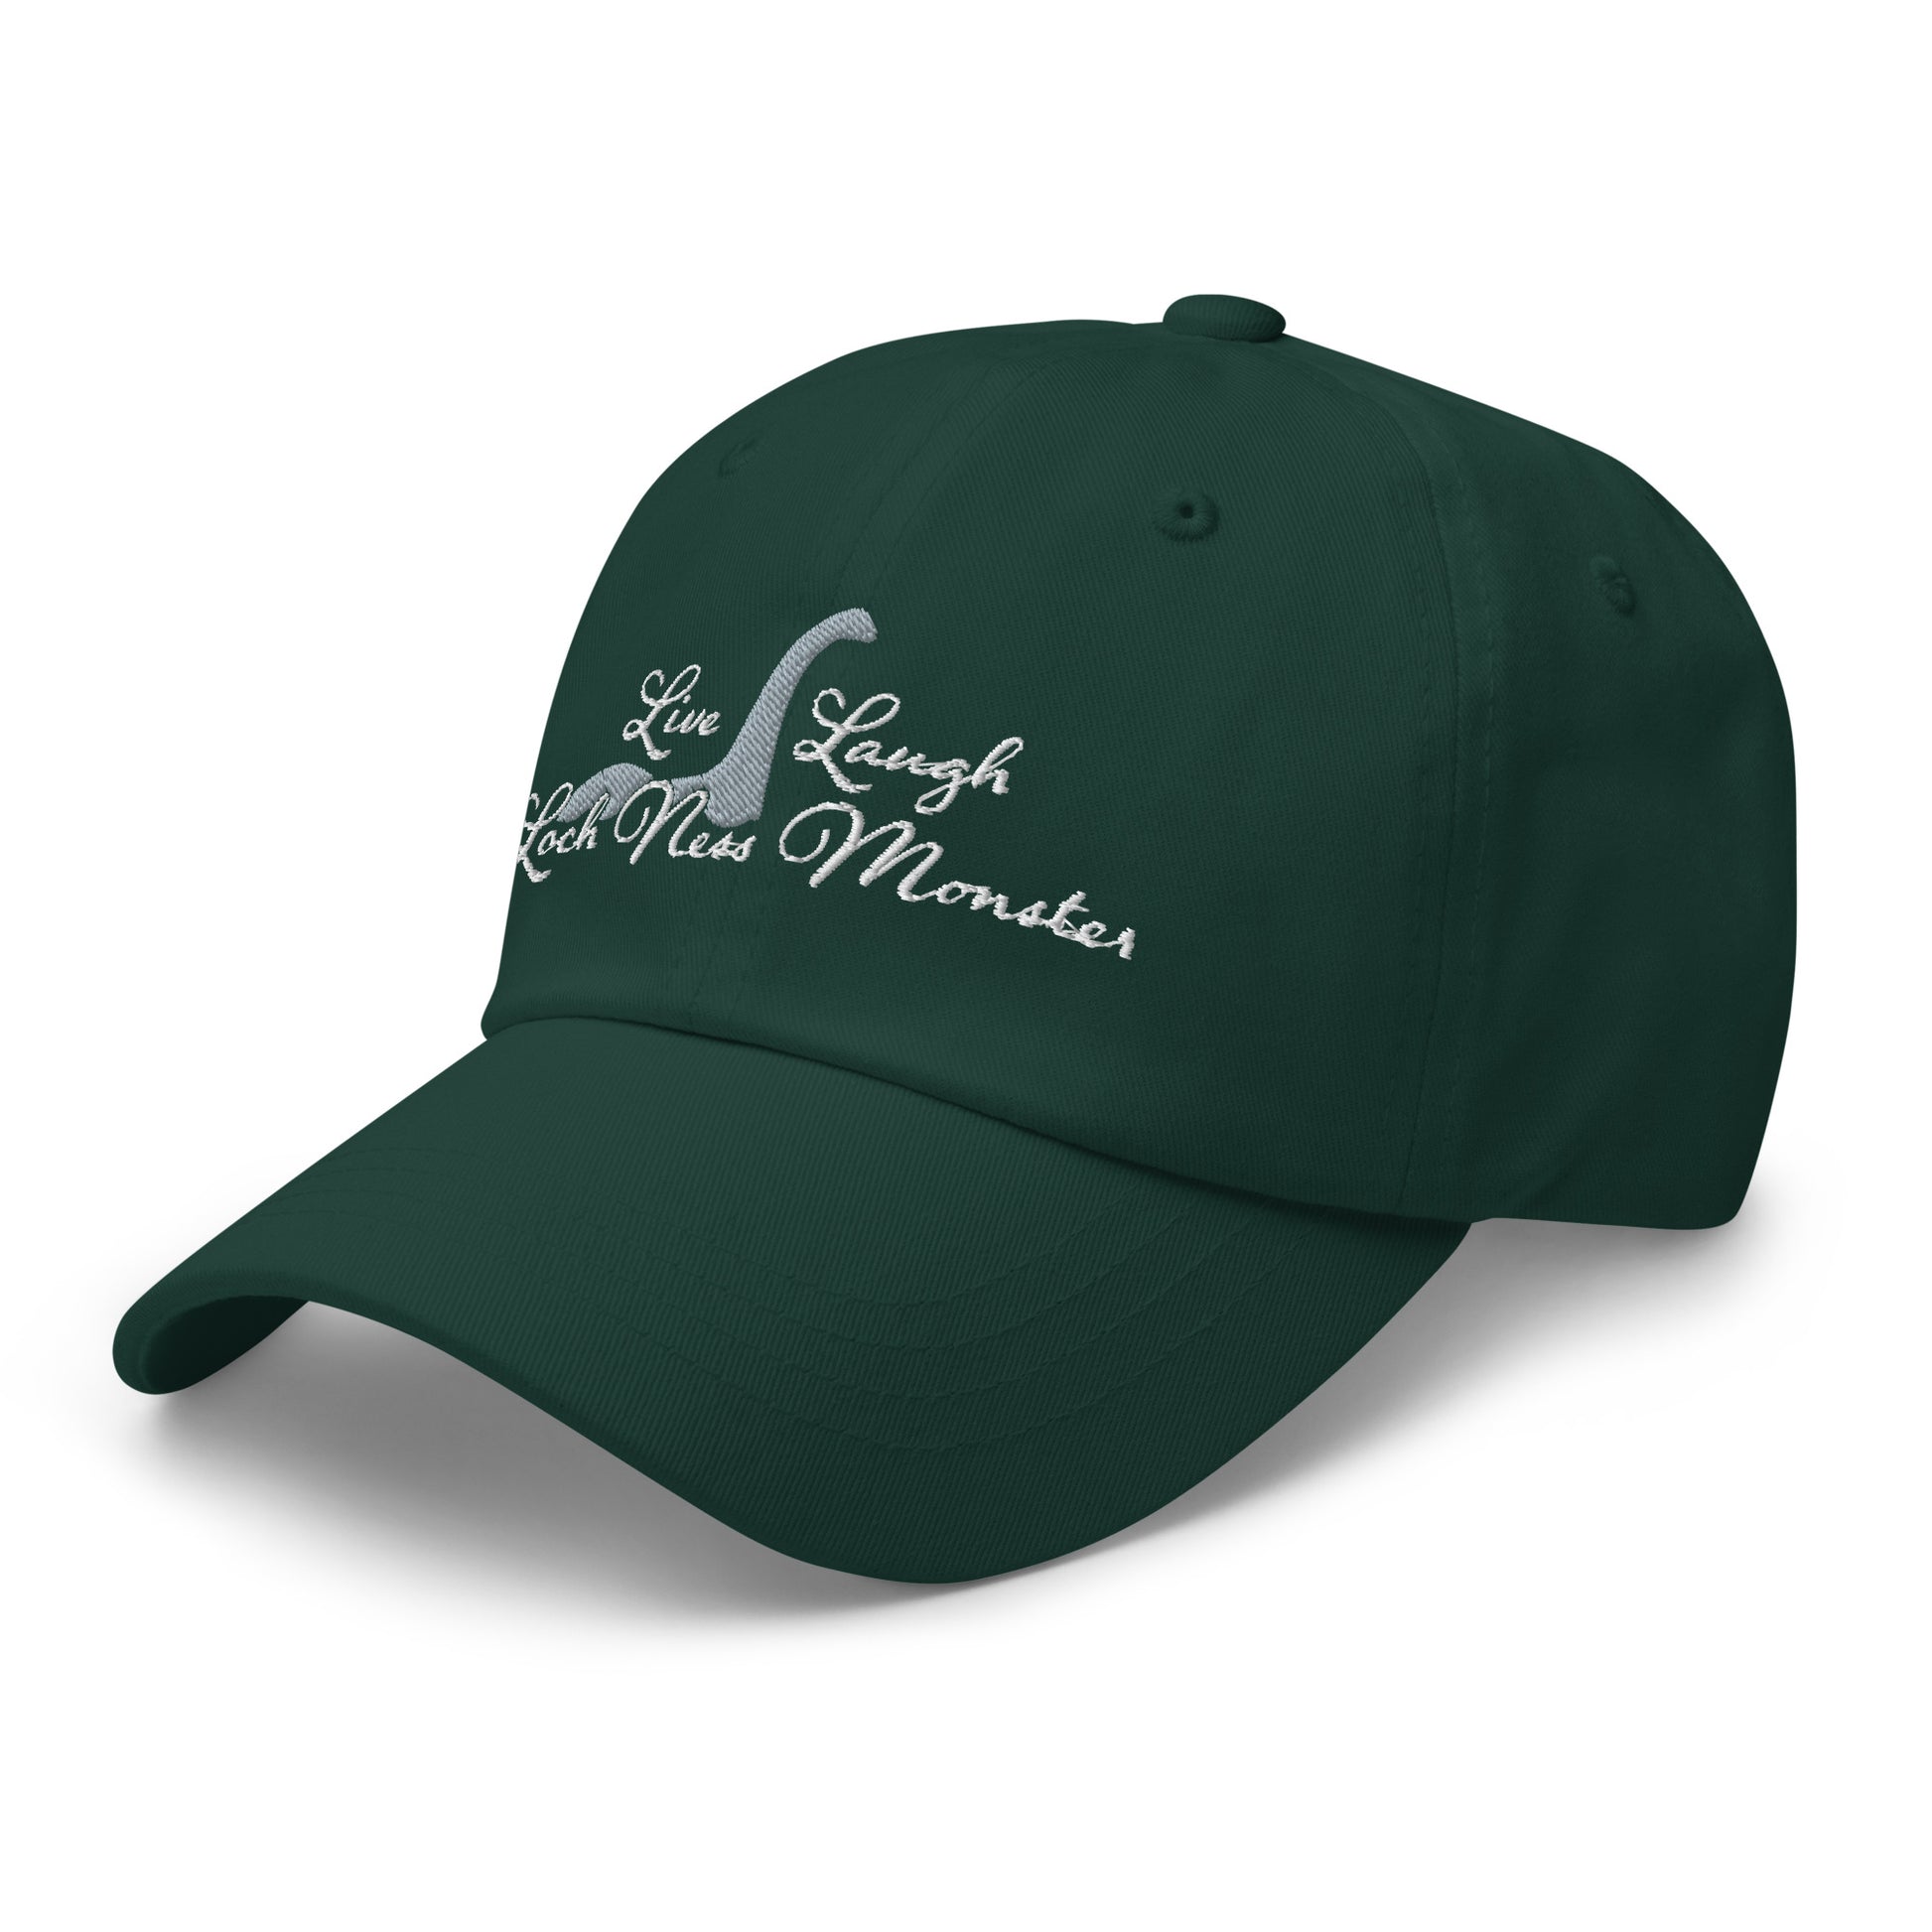 An image of a forest green baseball cap facing slightly to the left. White embroidered text decorates the front of the hat reading "Live Laugh Loch Ness Monster" with a silhouette of Nessie.